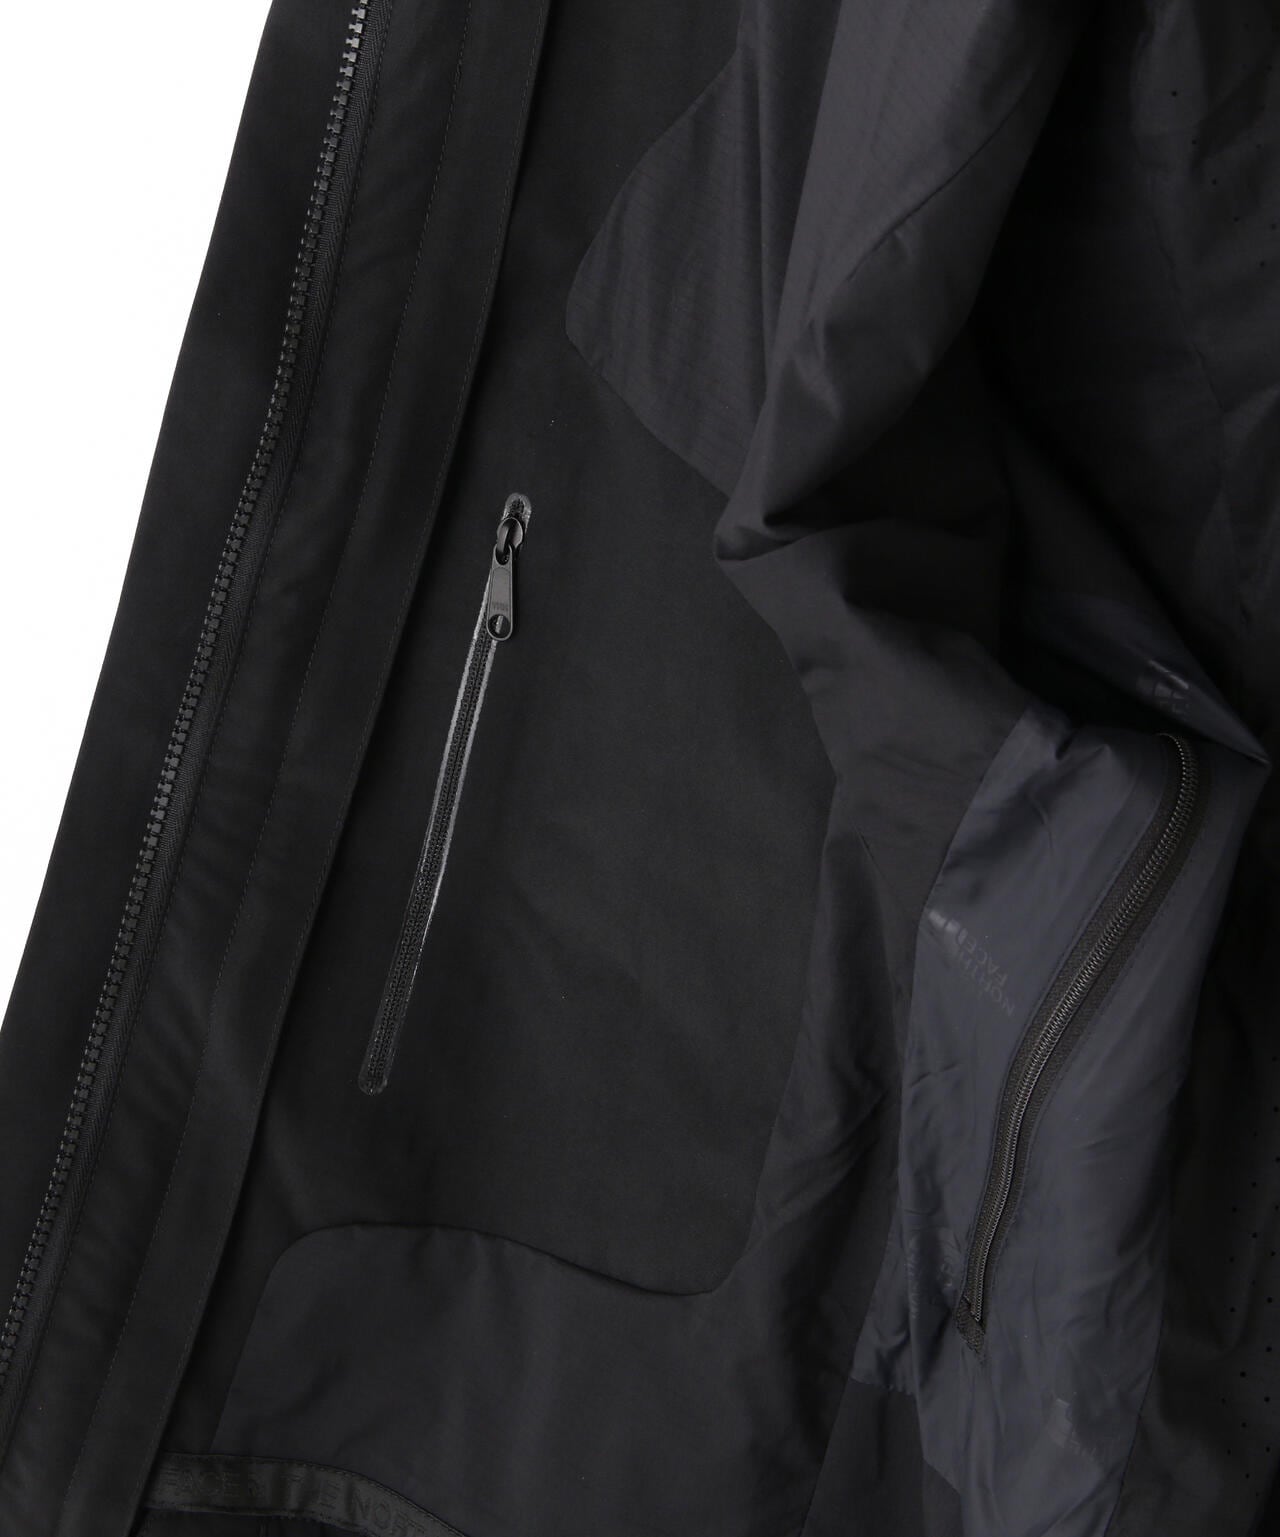 THE NORTH FACE OLD MOUNTAIN PARKA